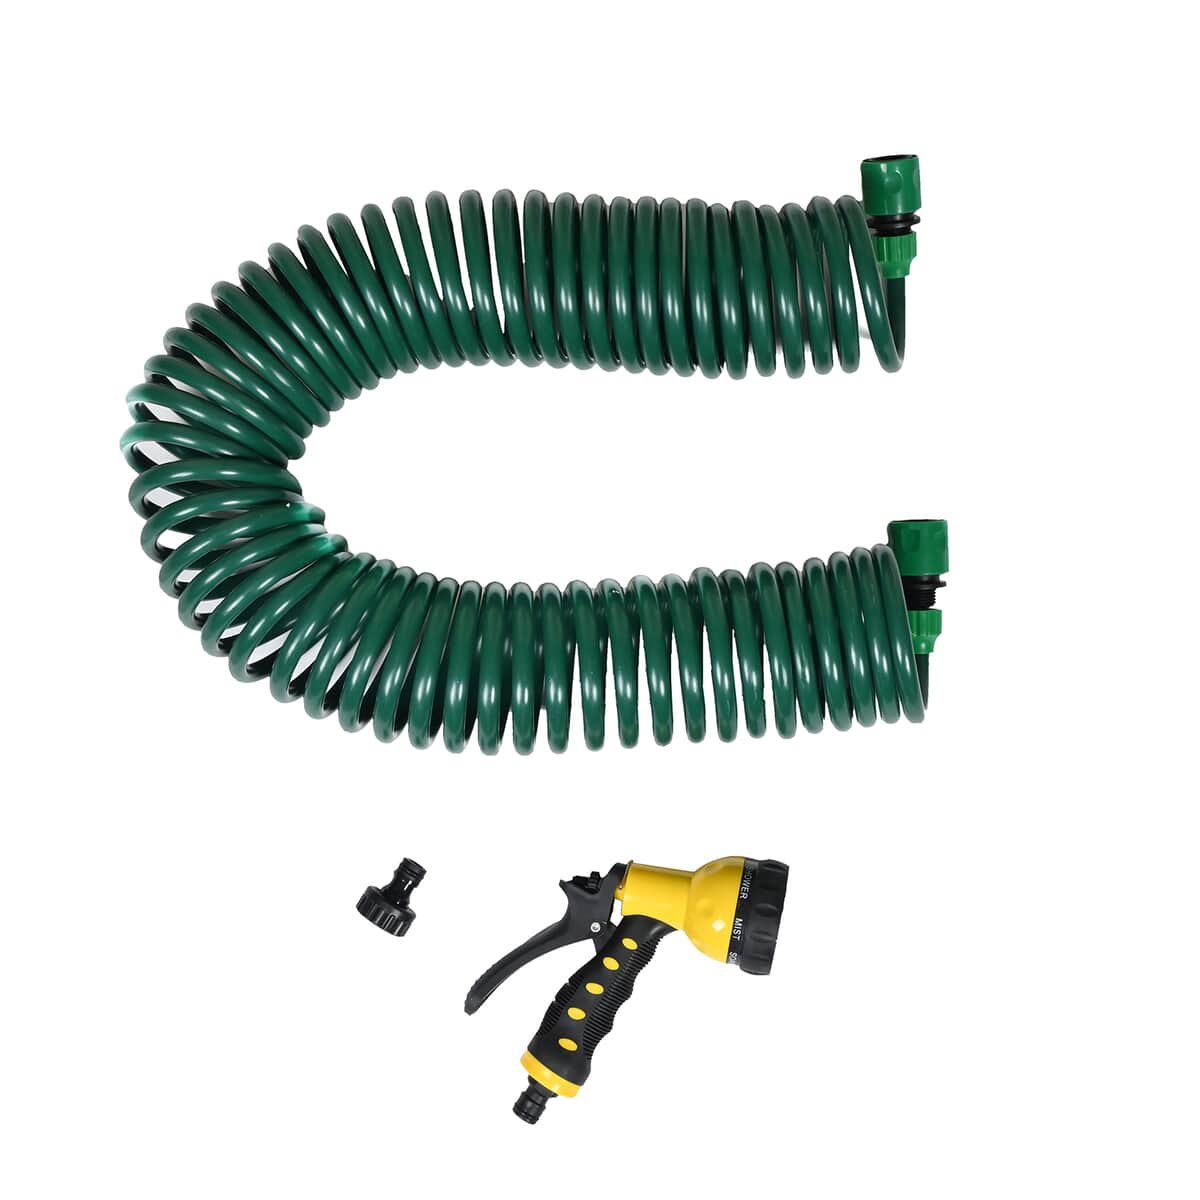 50 ft. Coiled Water Hose with Spray Nozzle - Green image number 0